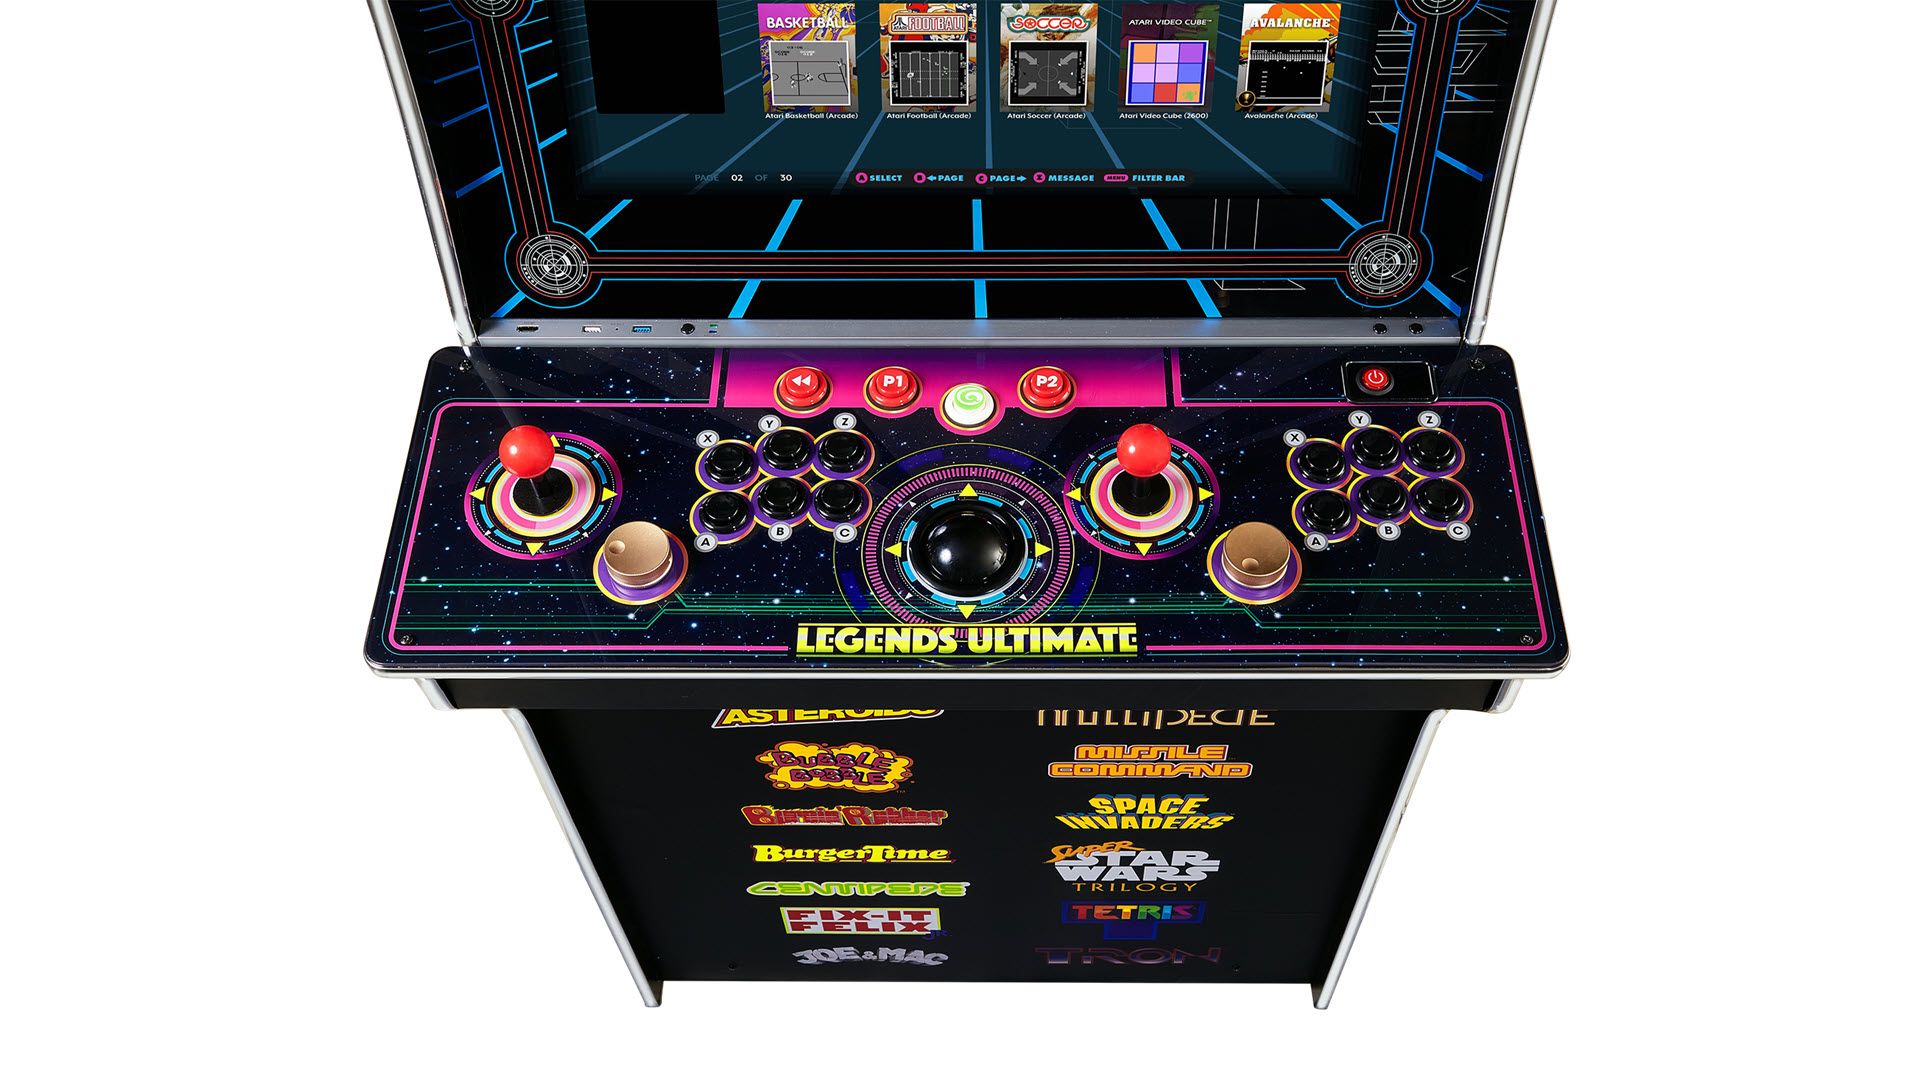 A closeup of the Legends Ultimate control deck, showing two joystick, six controlls buttons per stick, twp spinners, trackballs, and various other buttons.